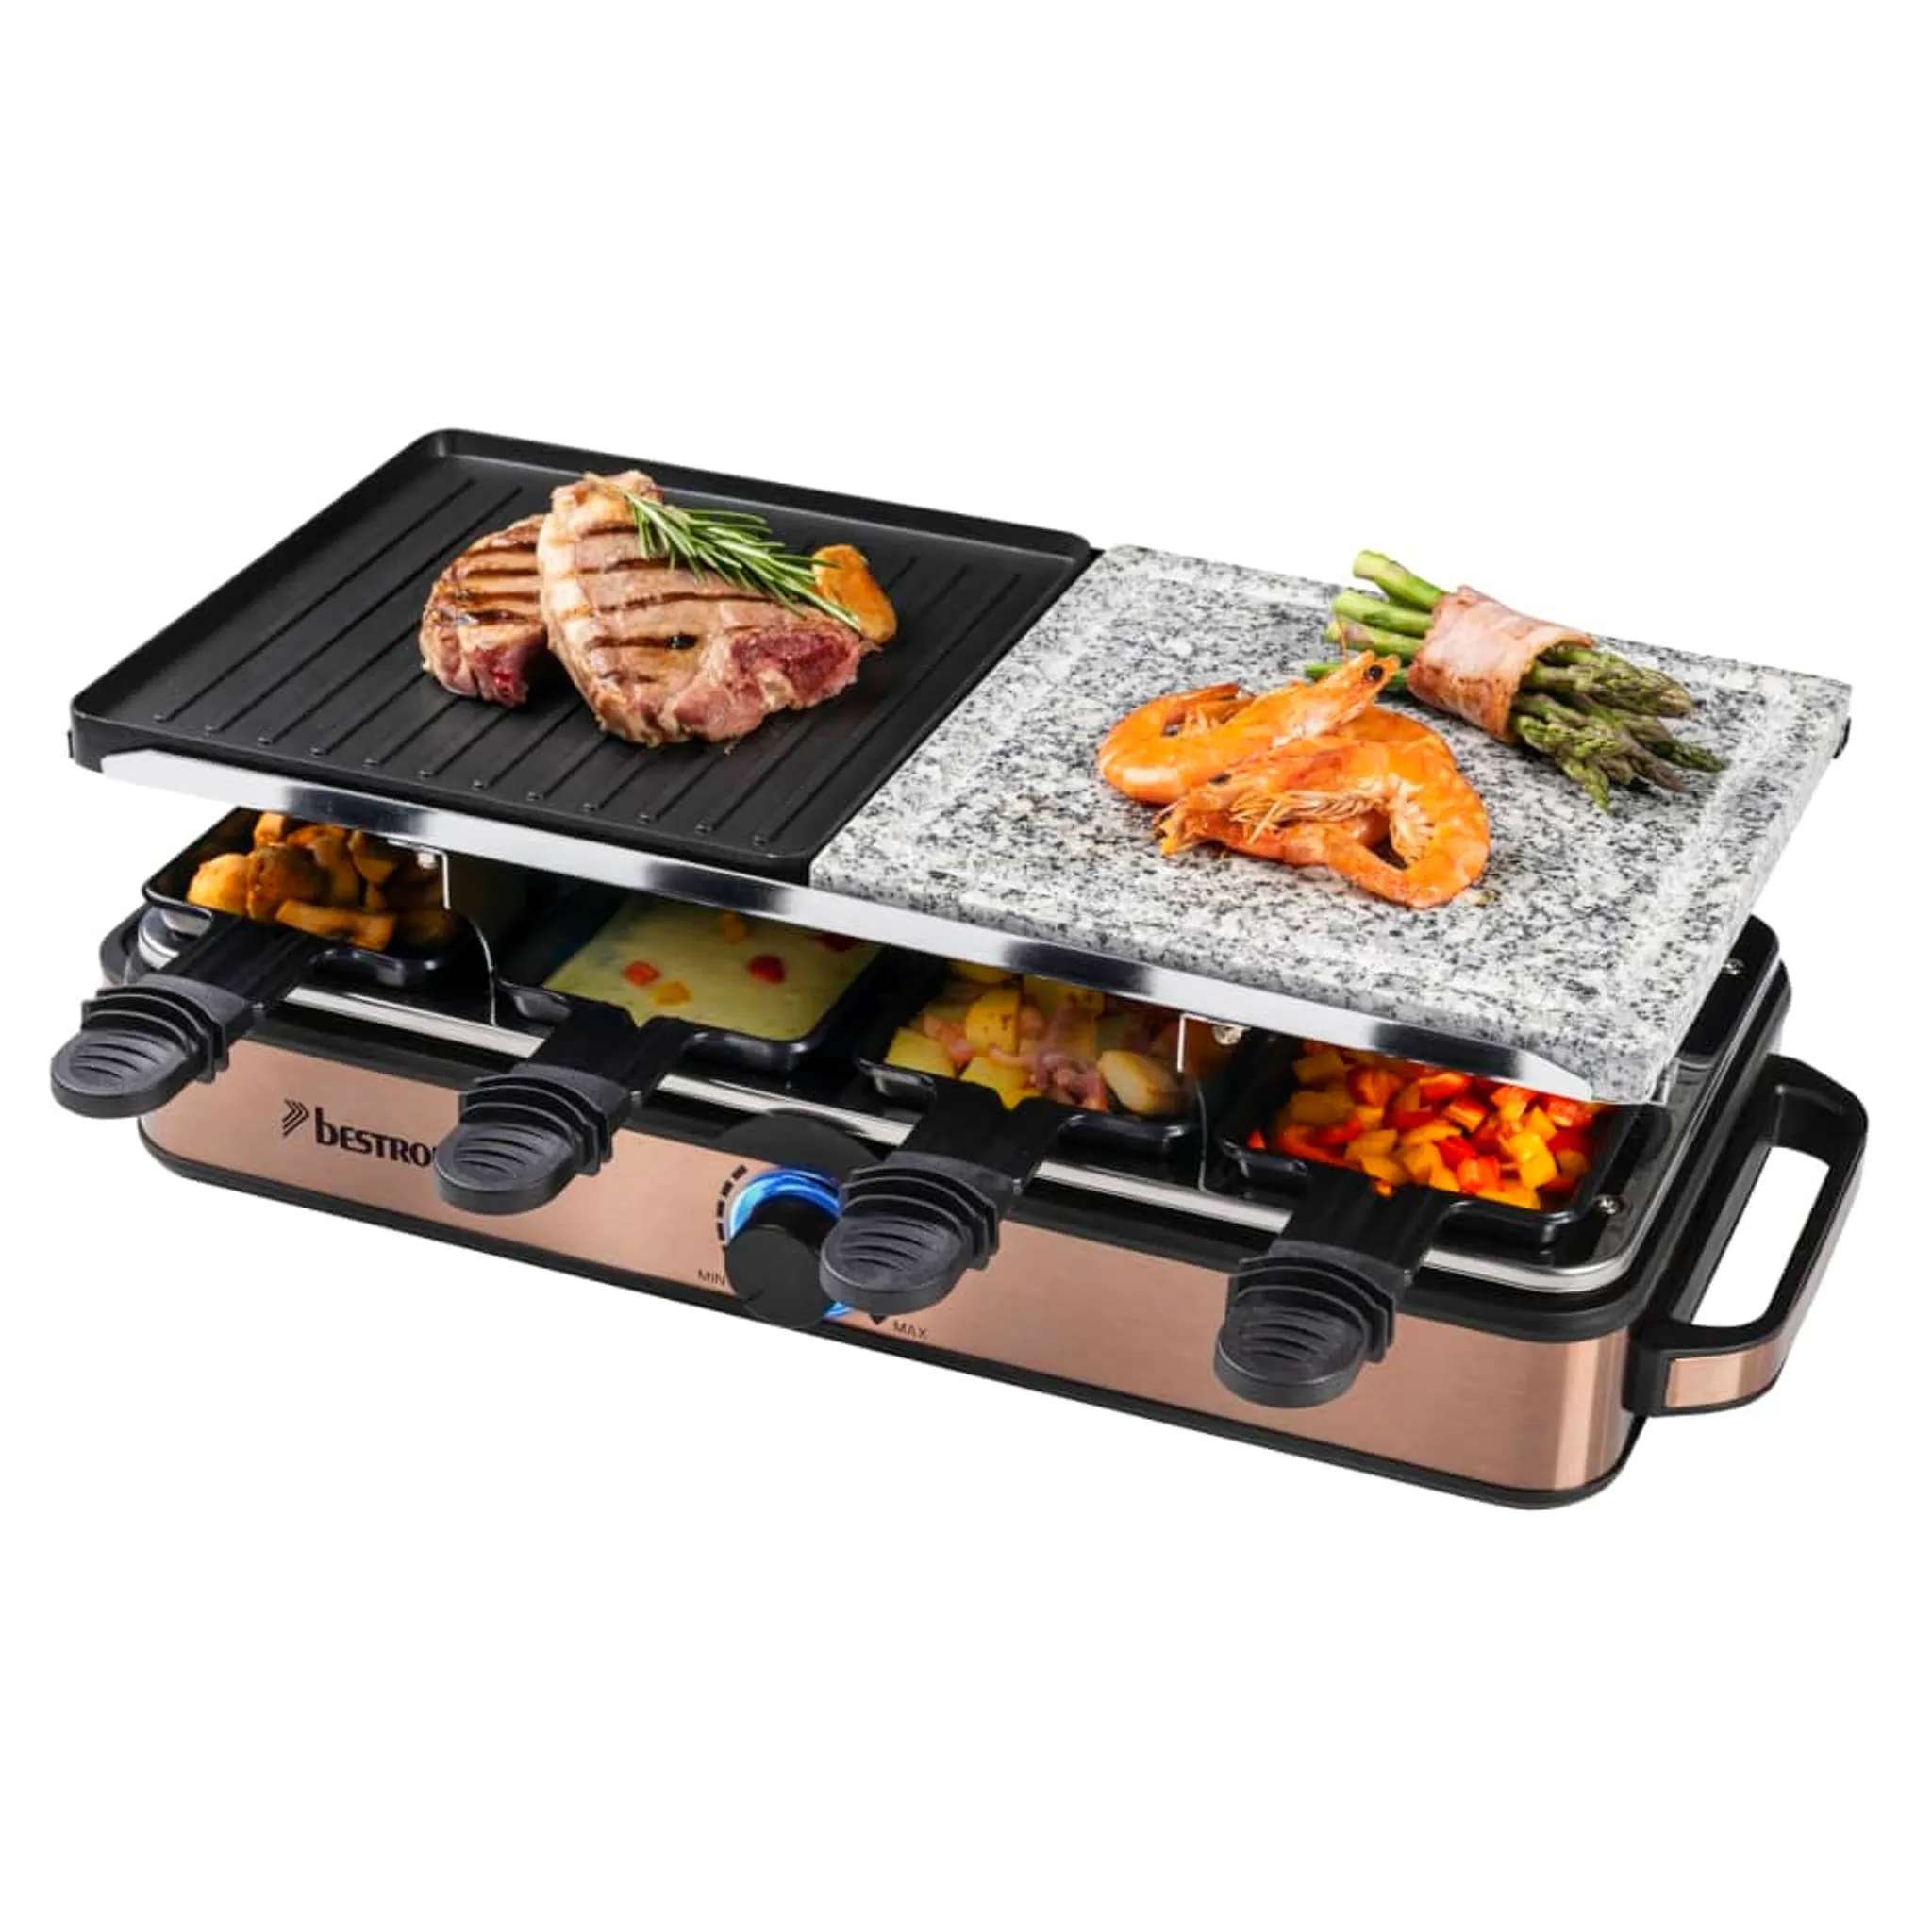 Raclette-Partygrill Bestron 2-in-1